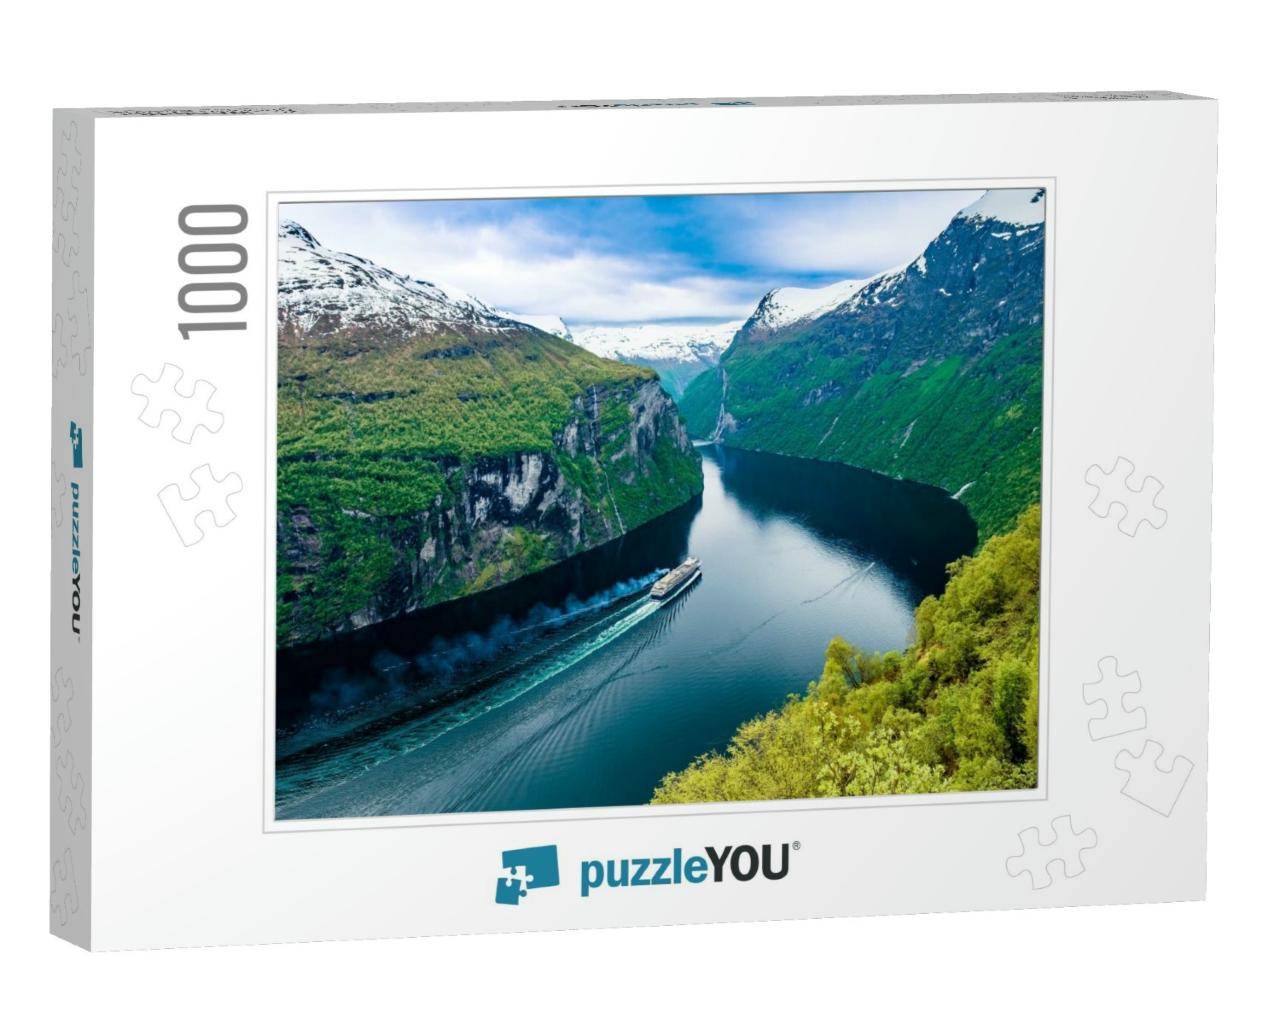 Geiranger Fjord, Beautiful Nature Norway. It is a 15-Kilo... Jigsaw Puzzle with 1000 pieces